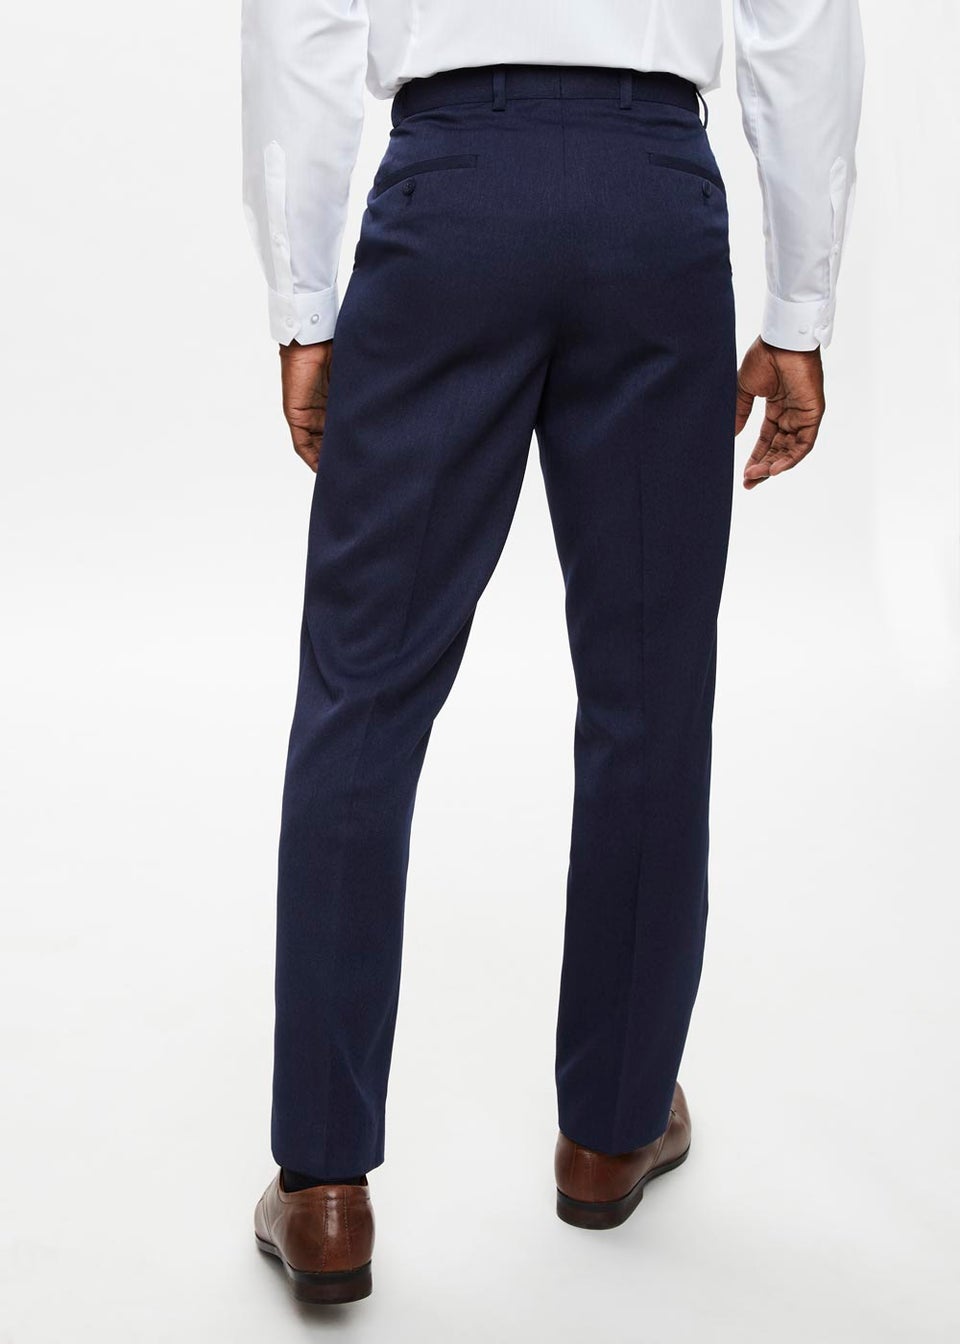 Taylor & Wright Brushed Twill Flexi Waist Trousers